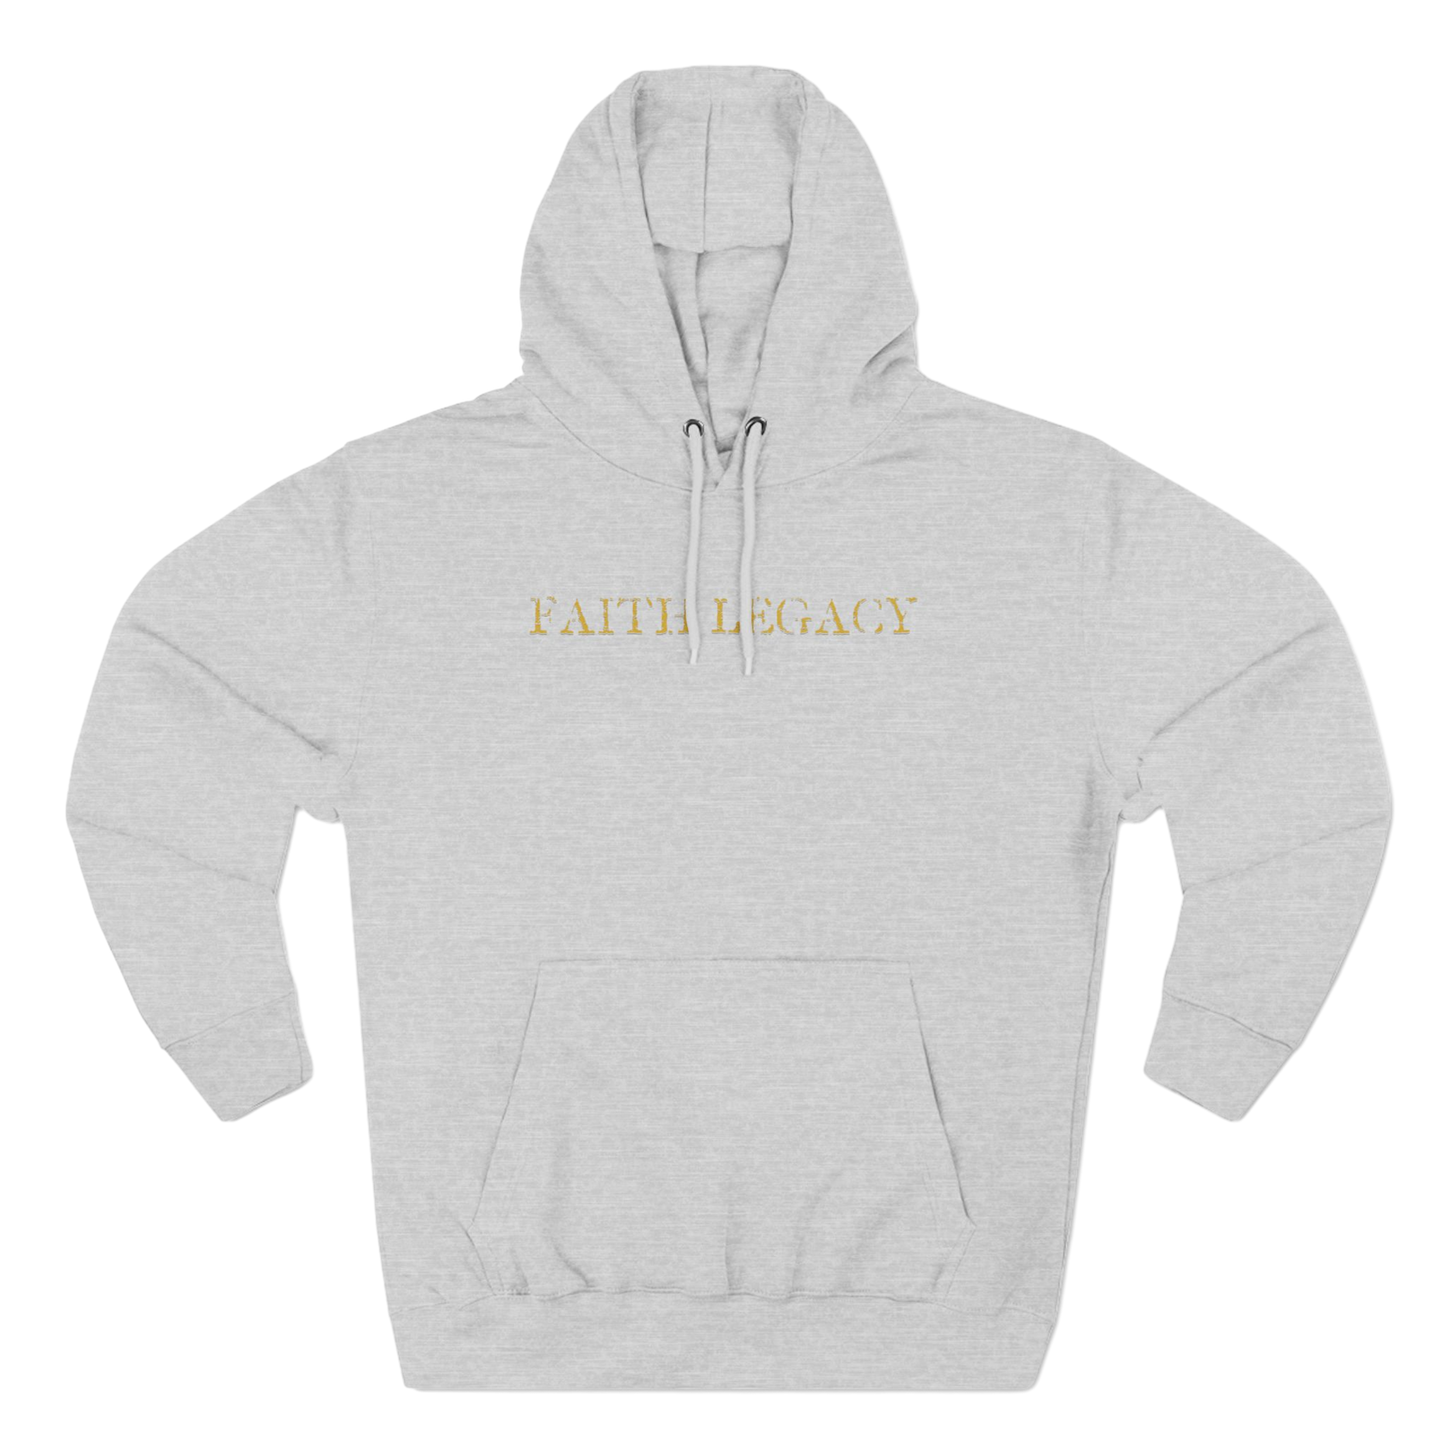 BoundlessFaith - To Live is Christ, To Die is Gain - Christian Apparel Hoodie LIGHT GREY - TRUE Apparel of God